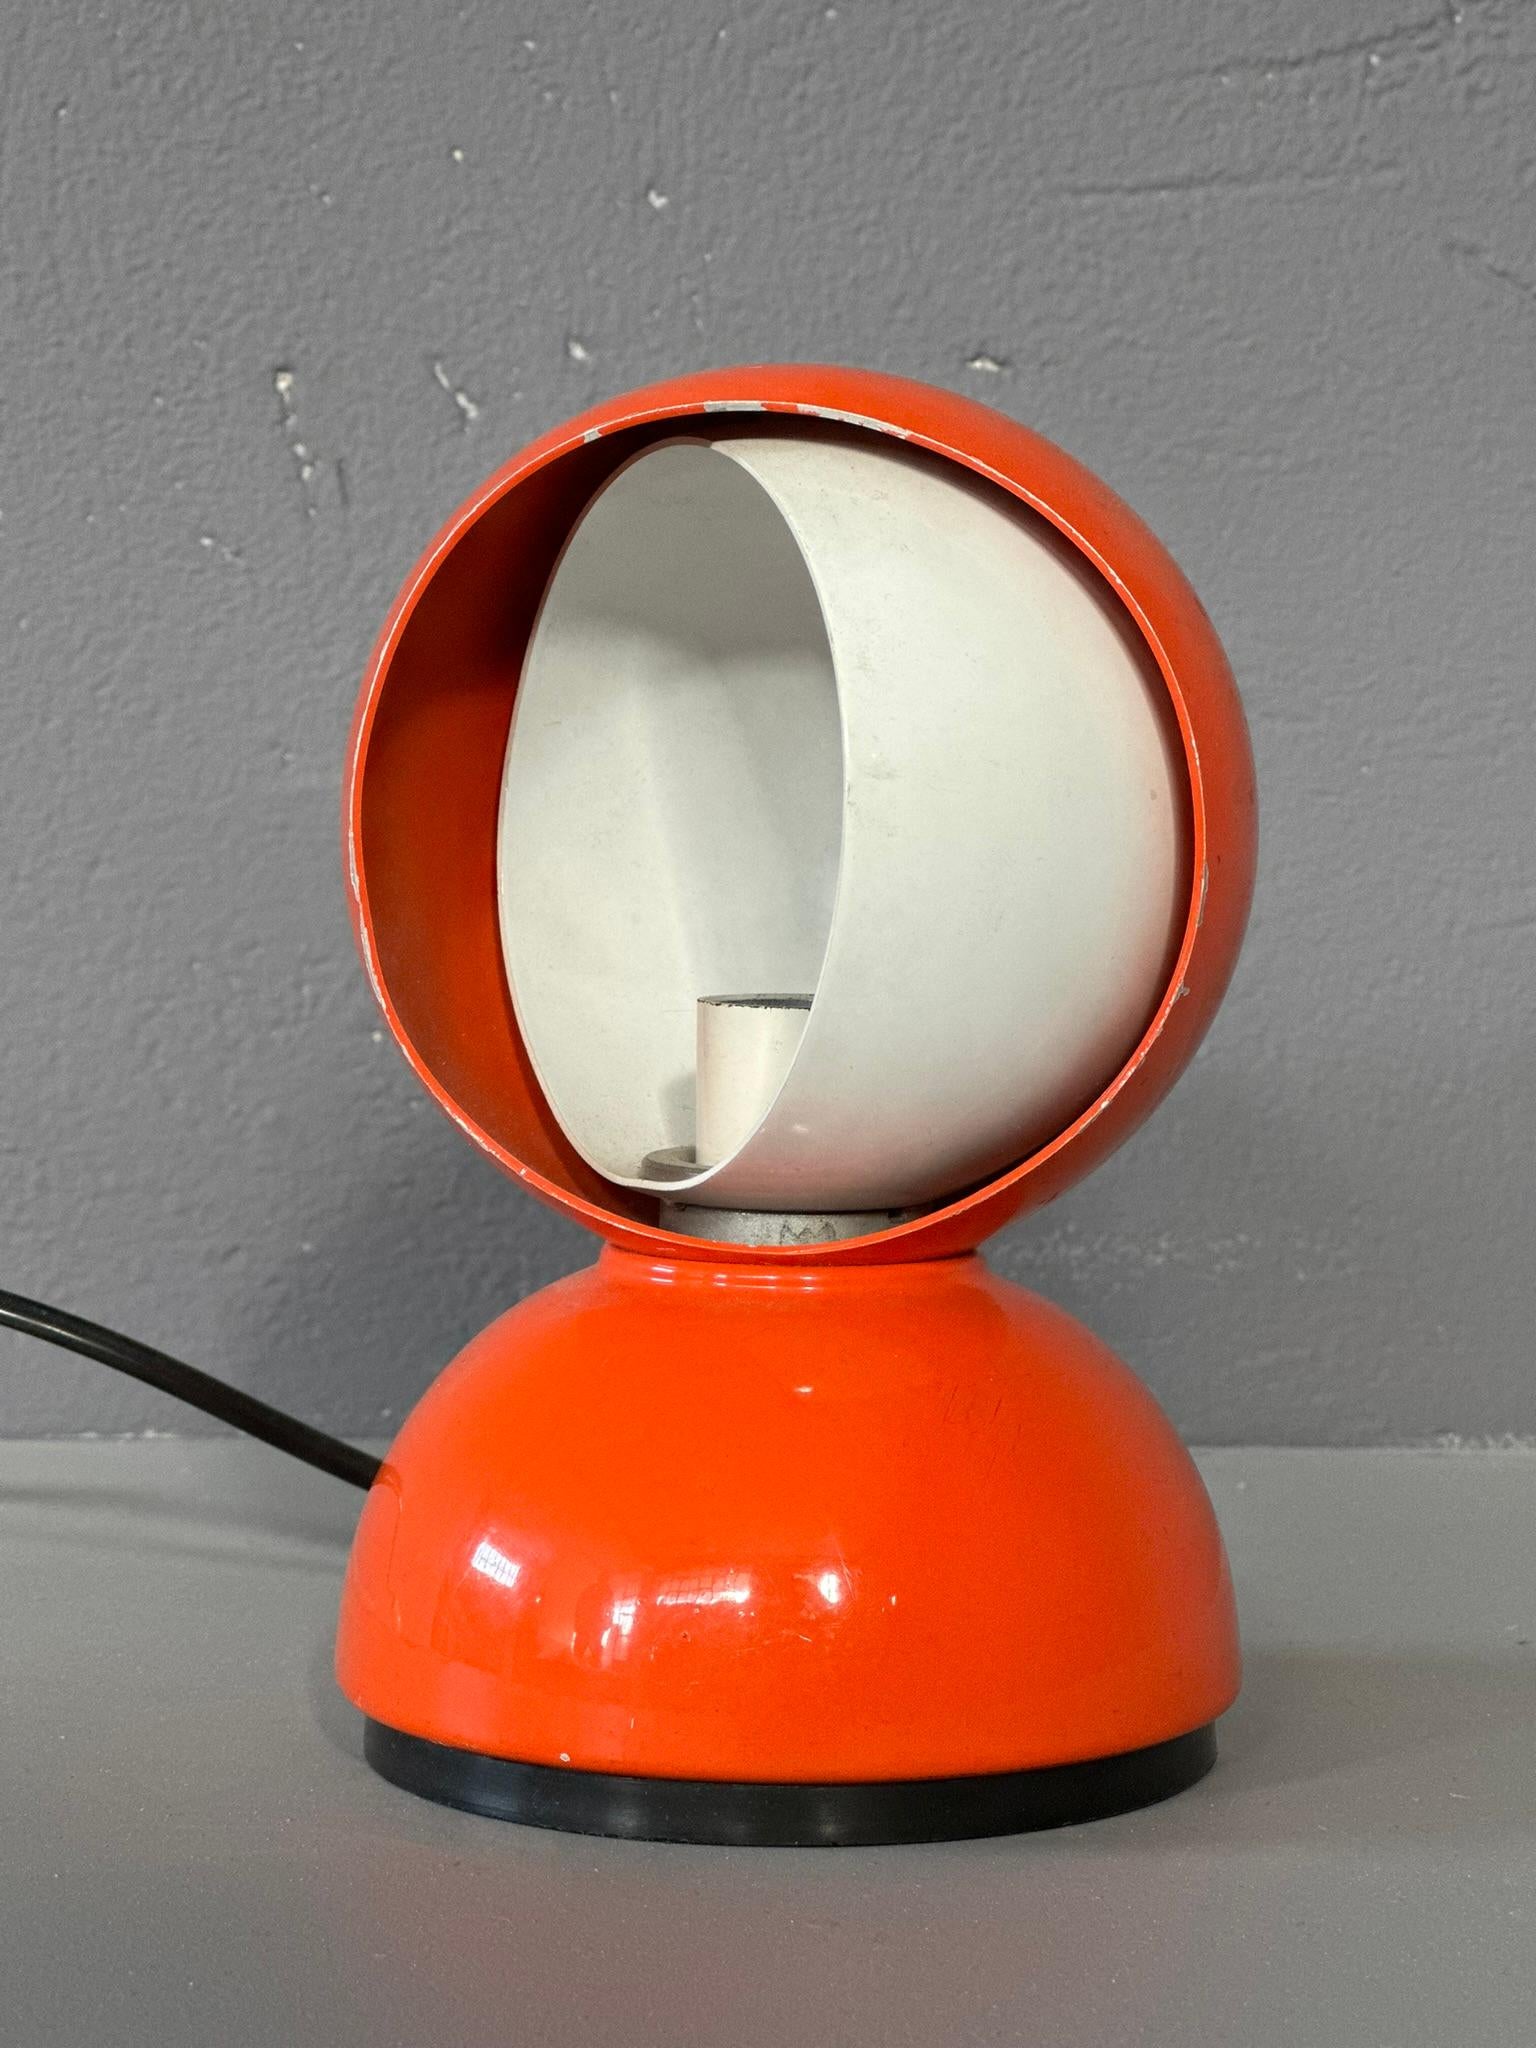 Vico Magistretti Eclisse Table Lamp
The Eclissi table lamp, an icon of Italian design designed by Vico Magistretti for Artemide.
This is the first edition, in orange color.
The lamp works